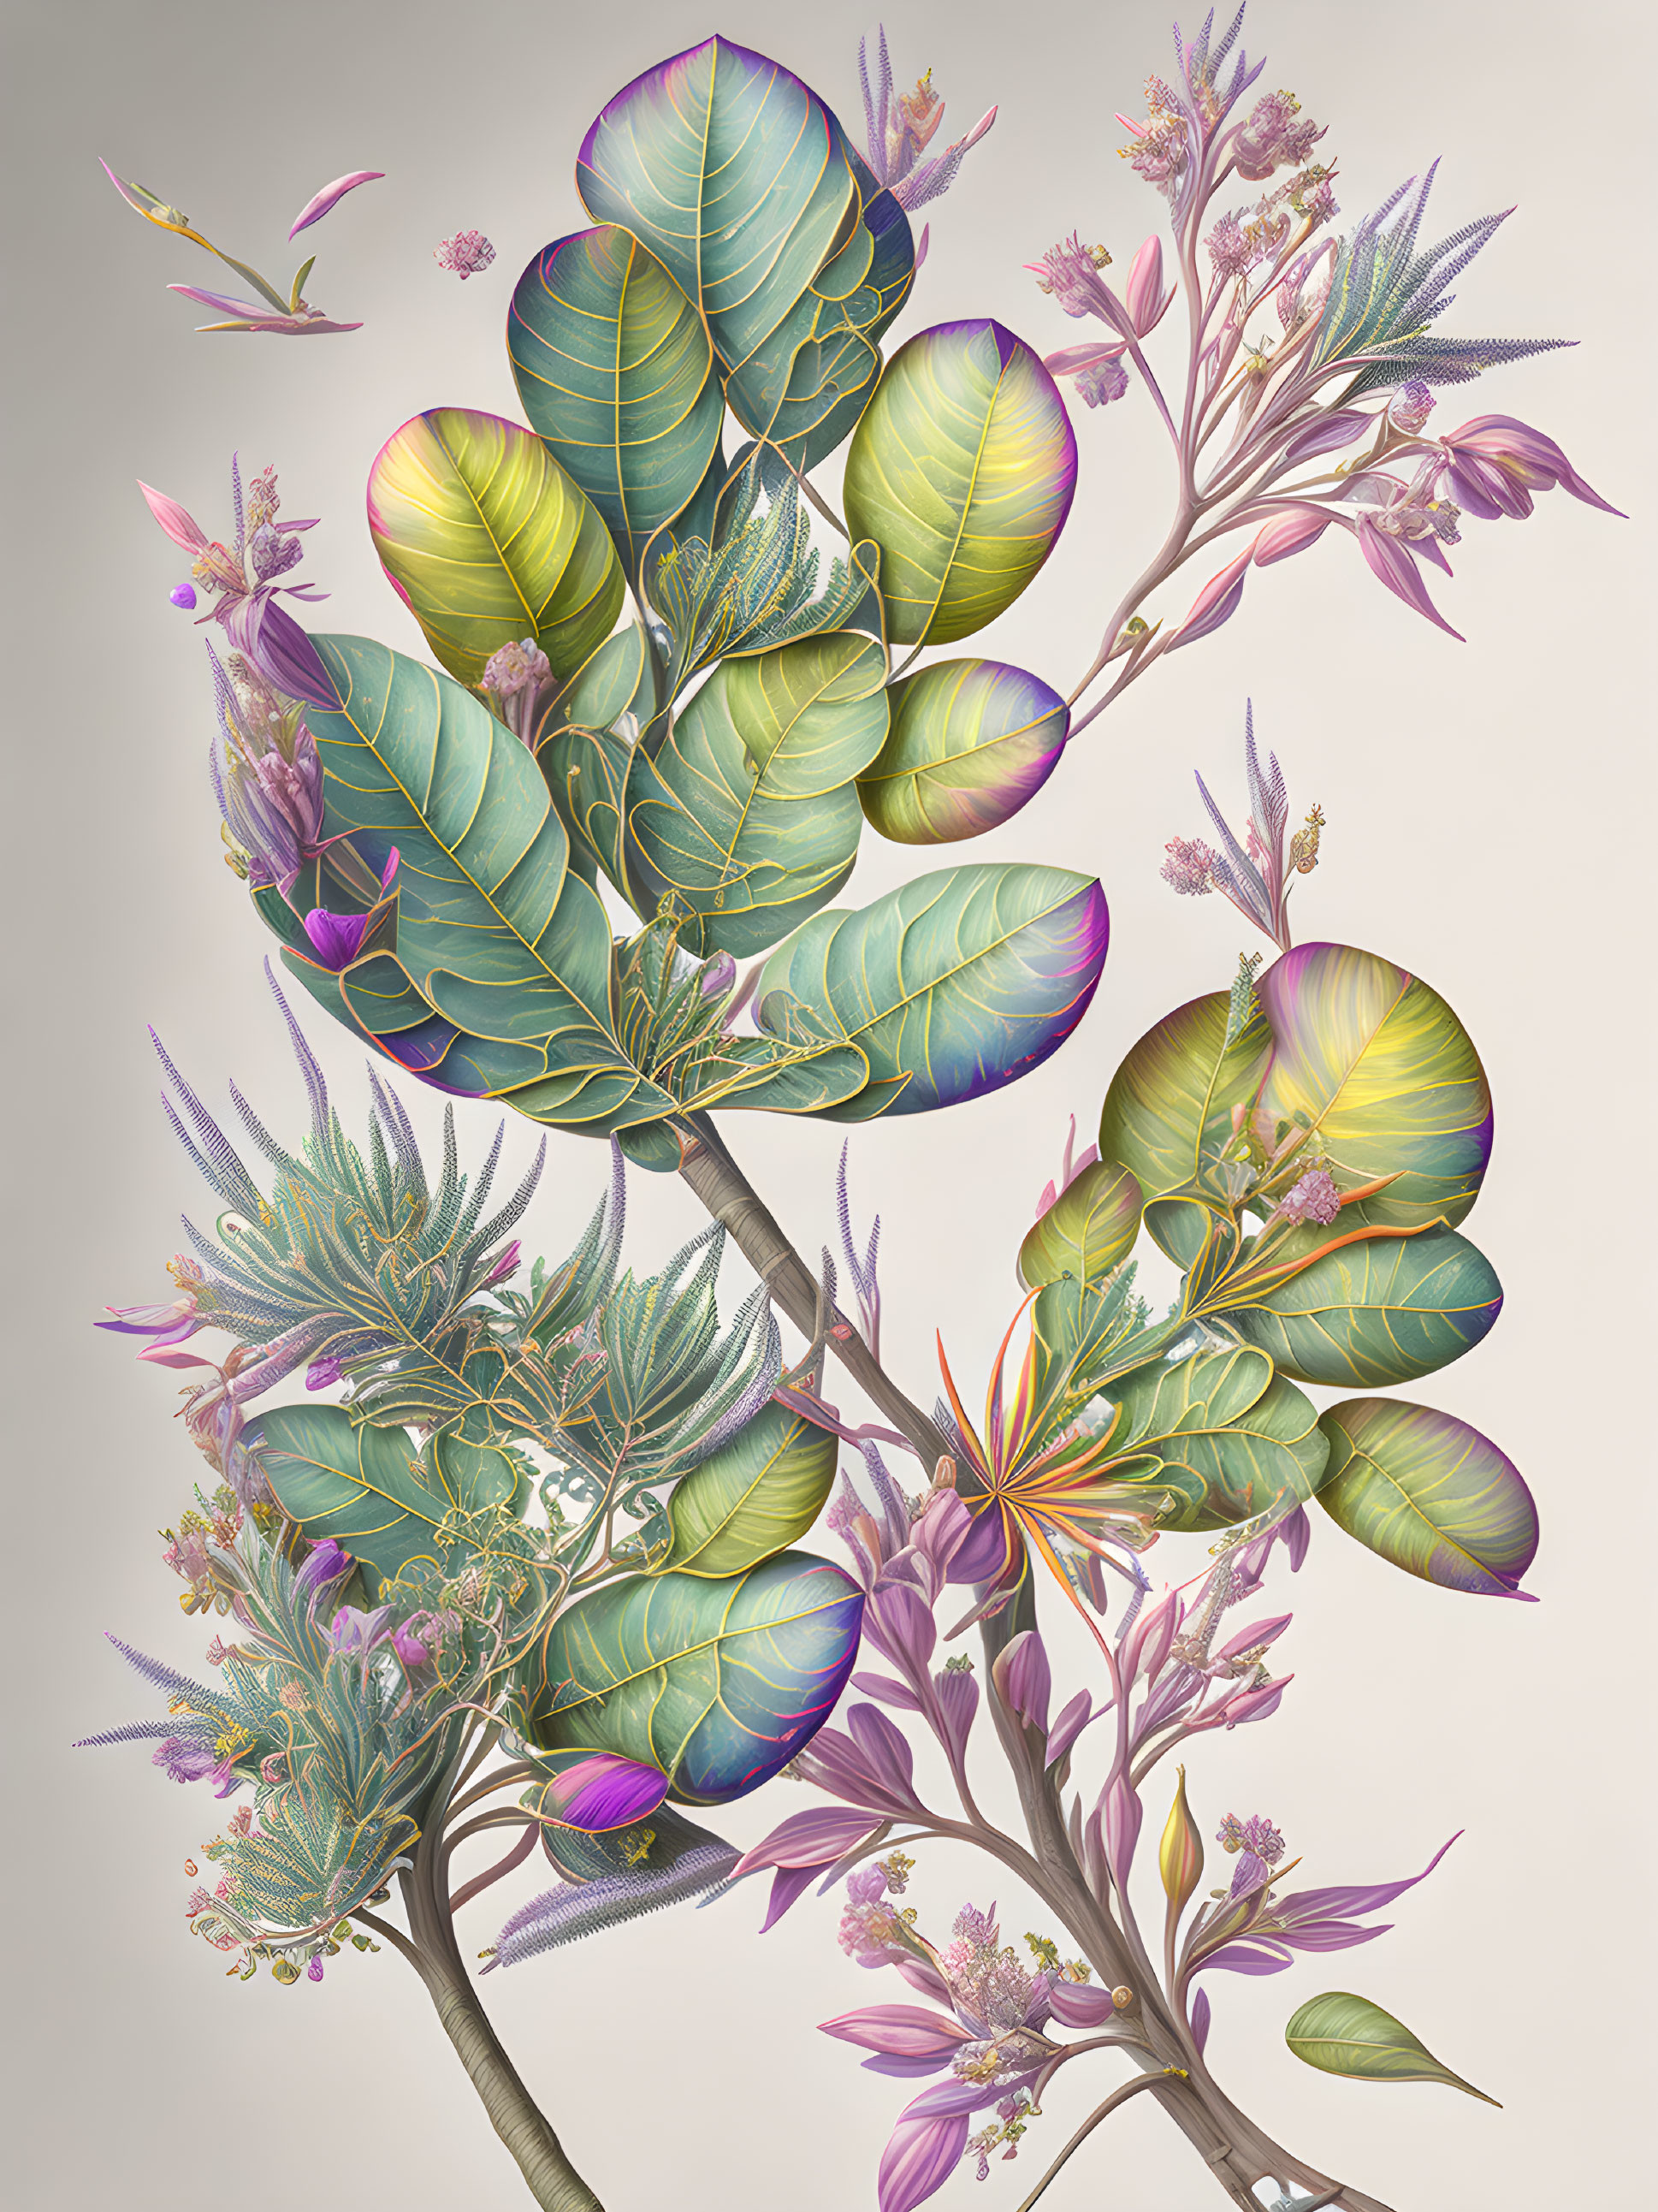 Botanical artwork featuring lush green leaves and delicate purple flowers